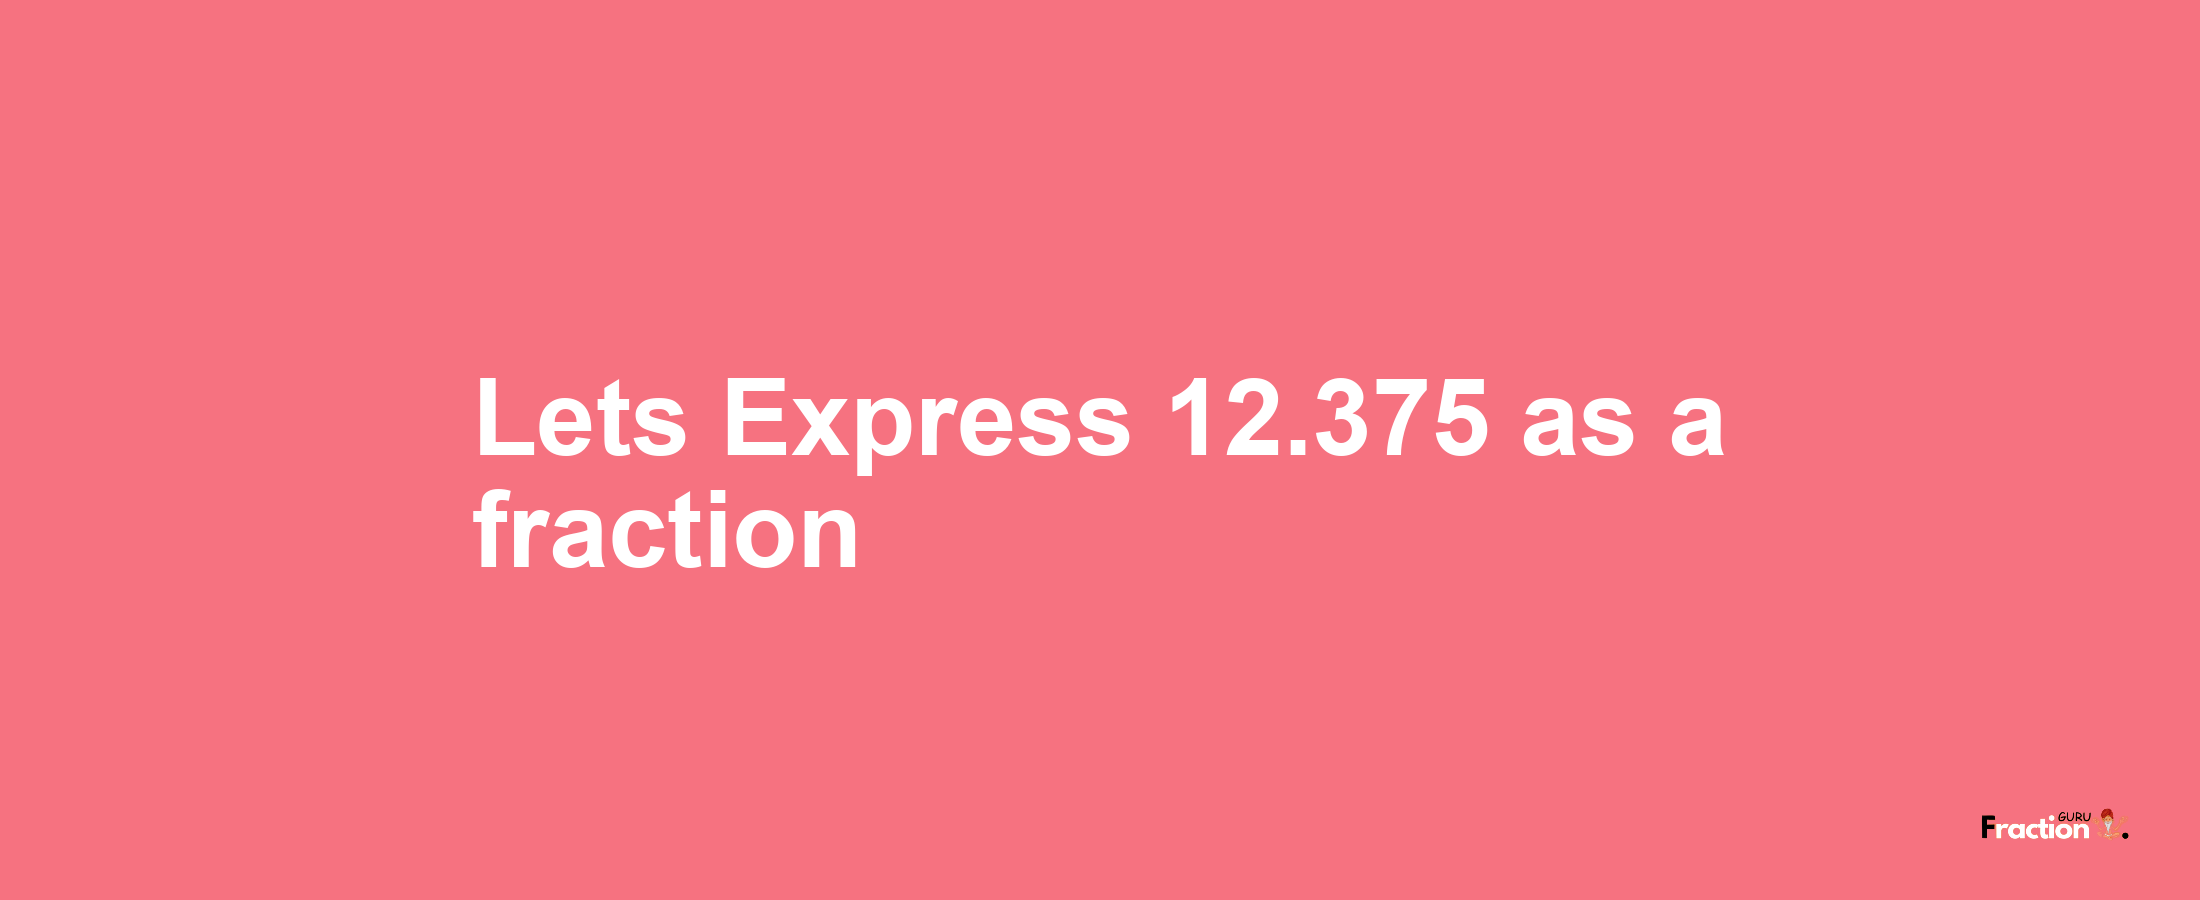 Lets Express 12.375 as afraction